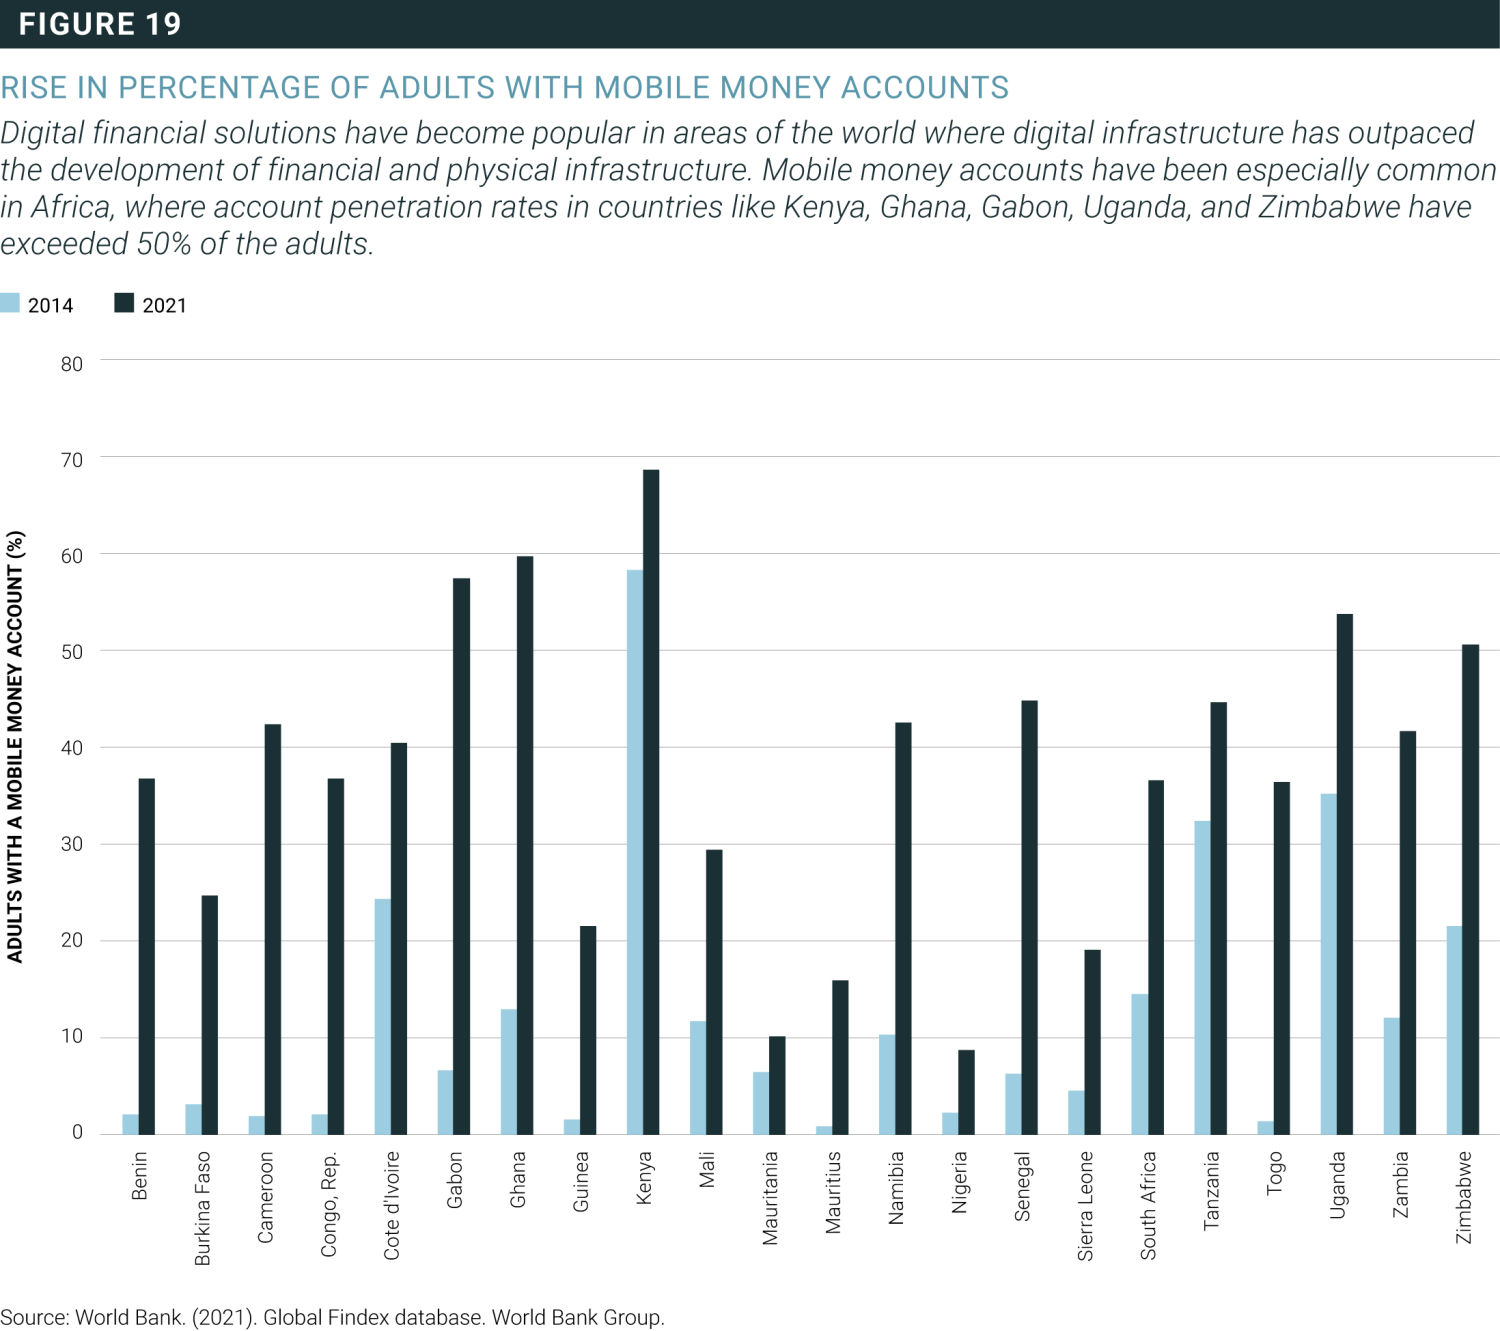 Rise in percentage of African adults with mobile money accounts, by country